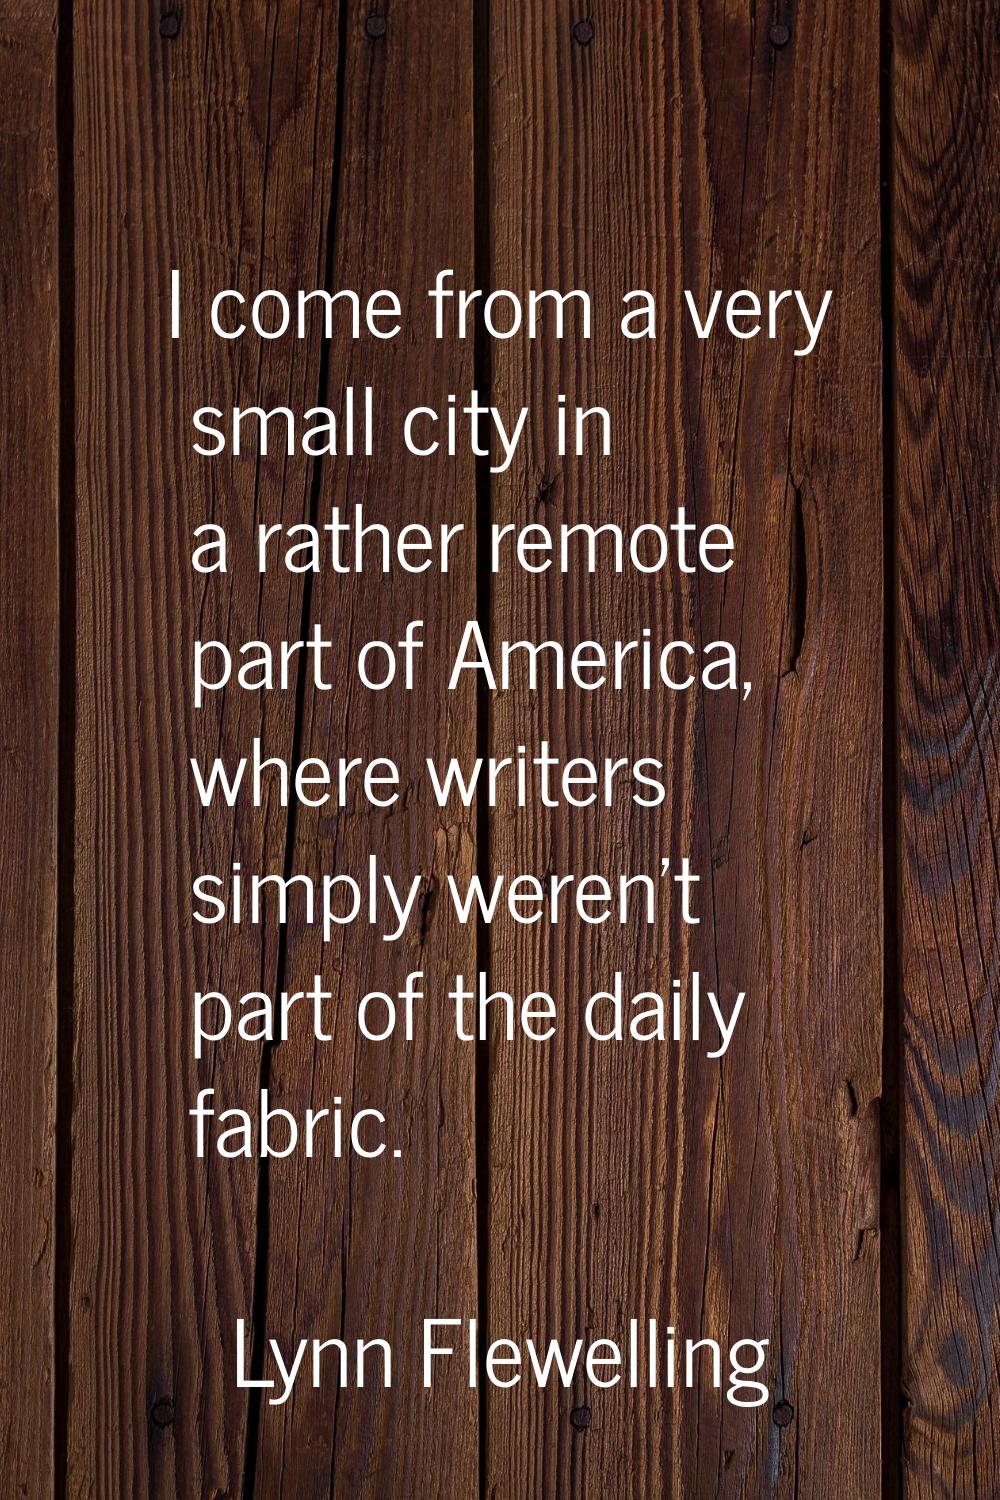 I come from a very small city in a rather remote part of America, where writers simply weren't part